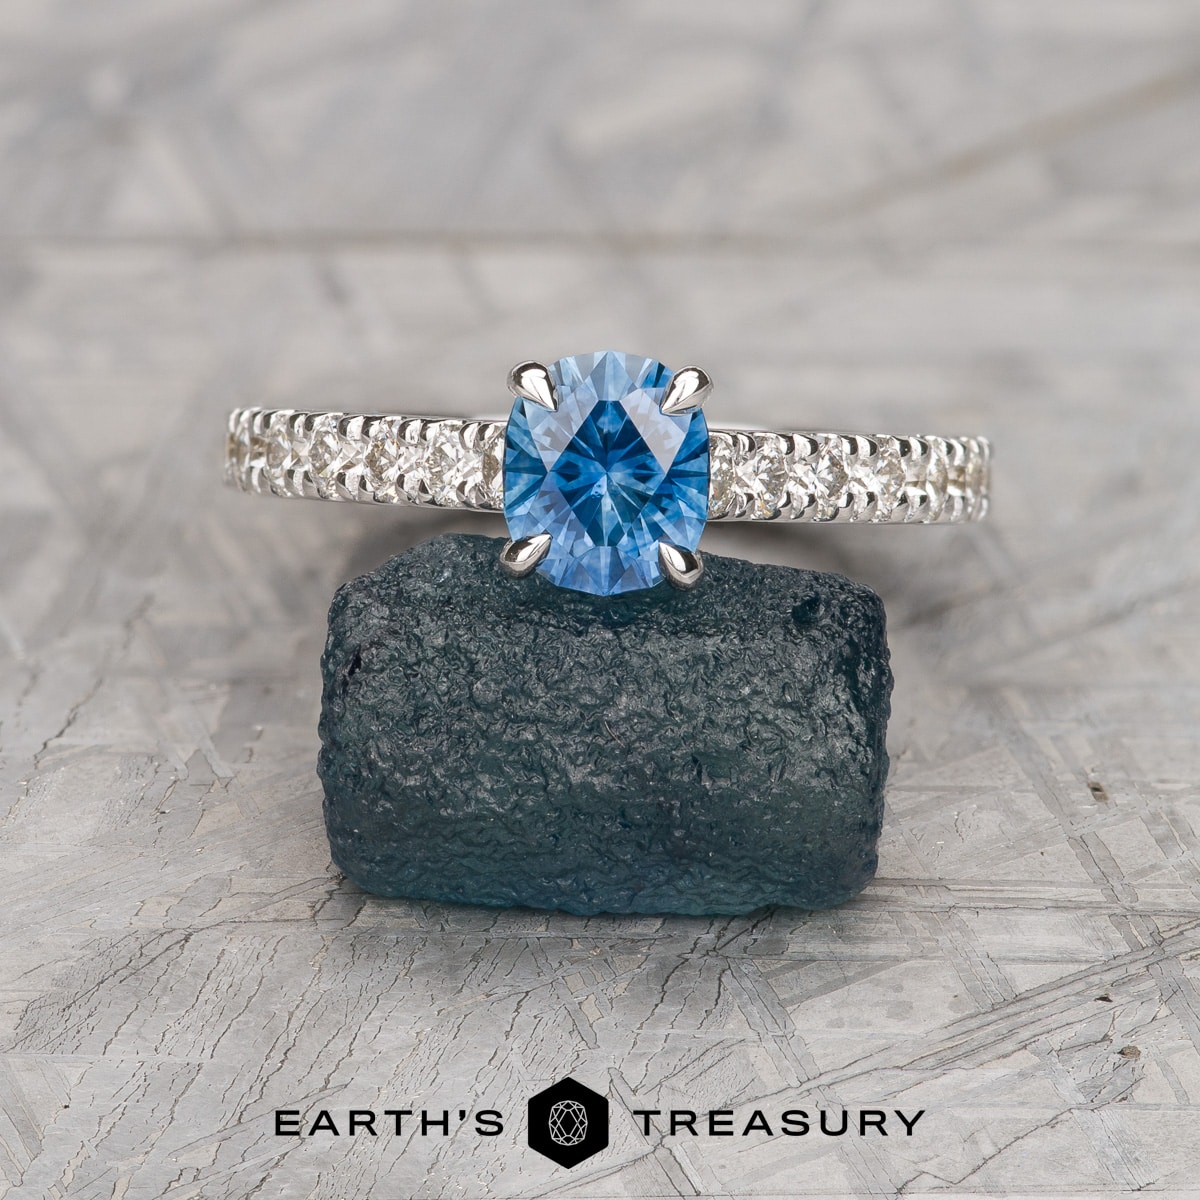 The "Marina" Deluxe Pave in 14k white gold with 0.93-Carat Montana Sapphire